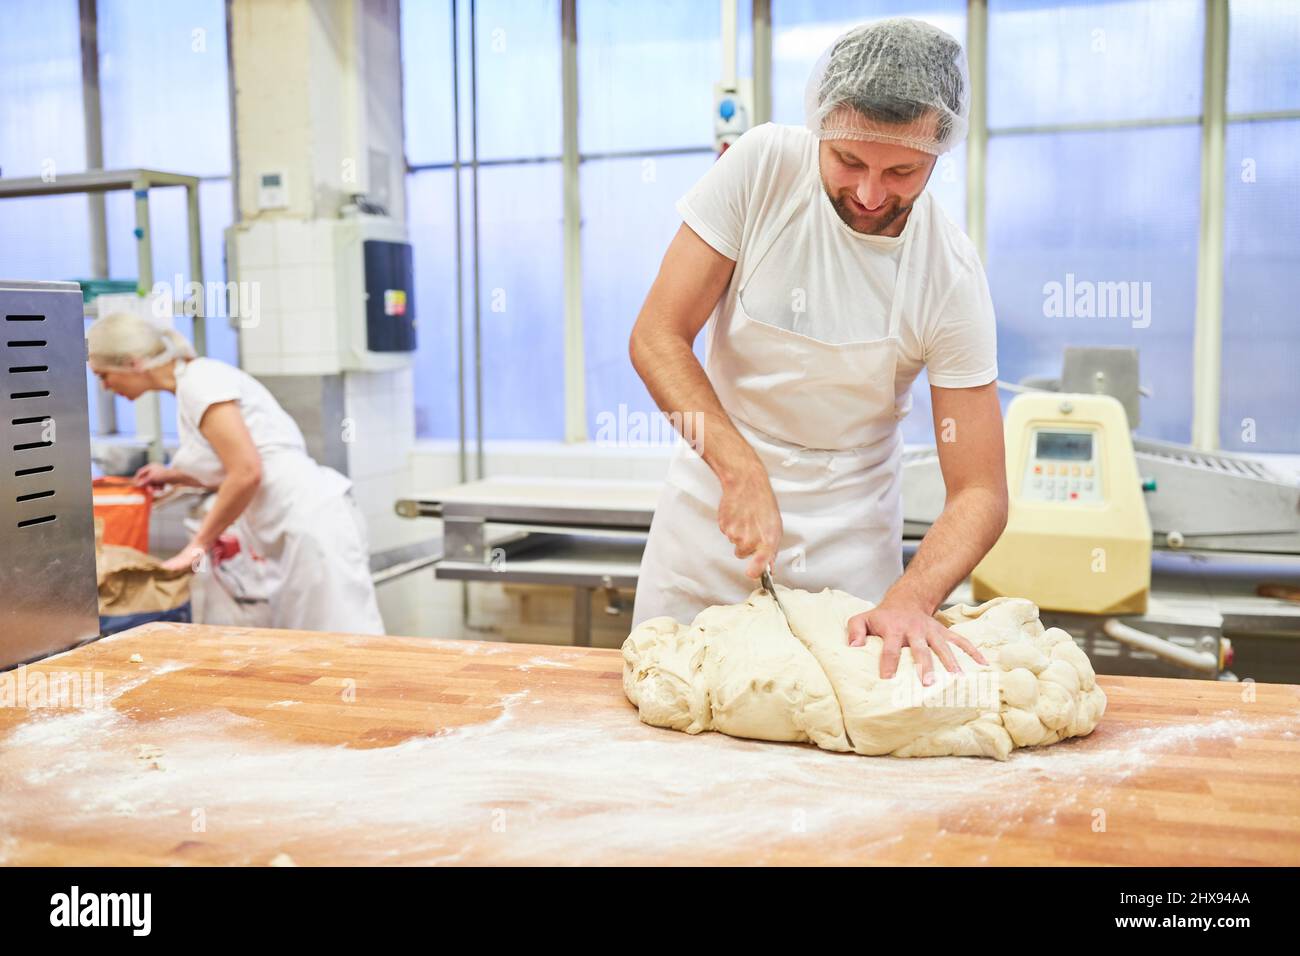 Young man as a baker cutting the dough in preparation for baking bread in the bakery Stock Photo